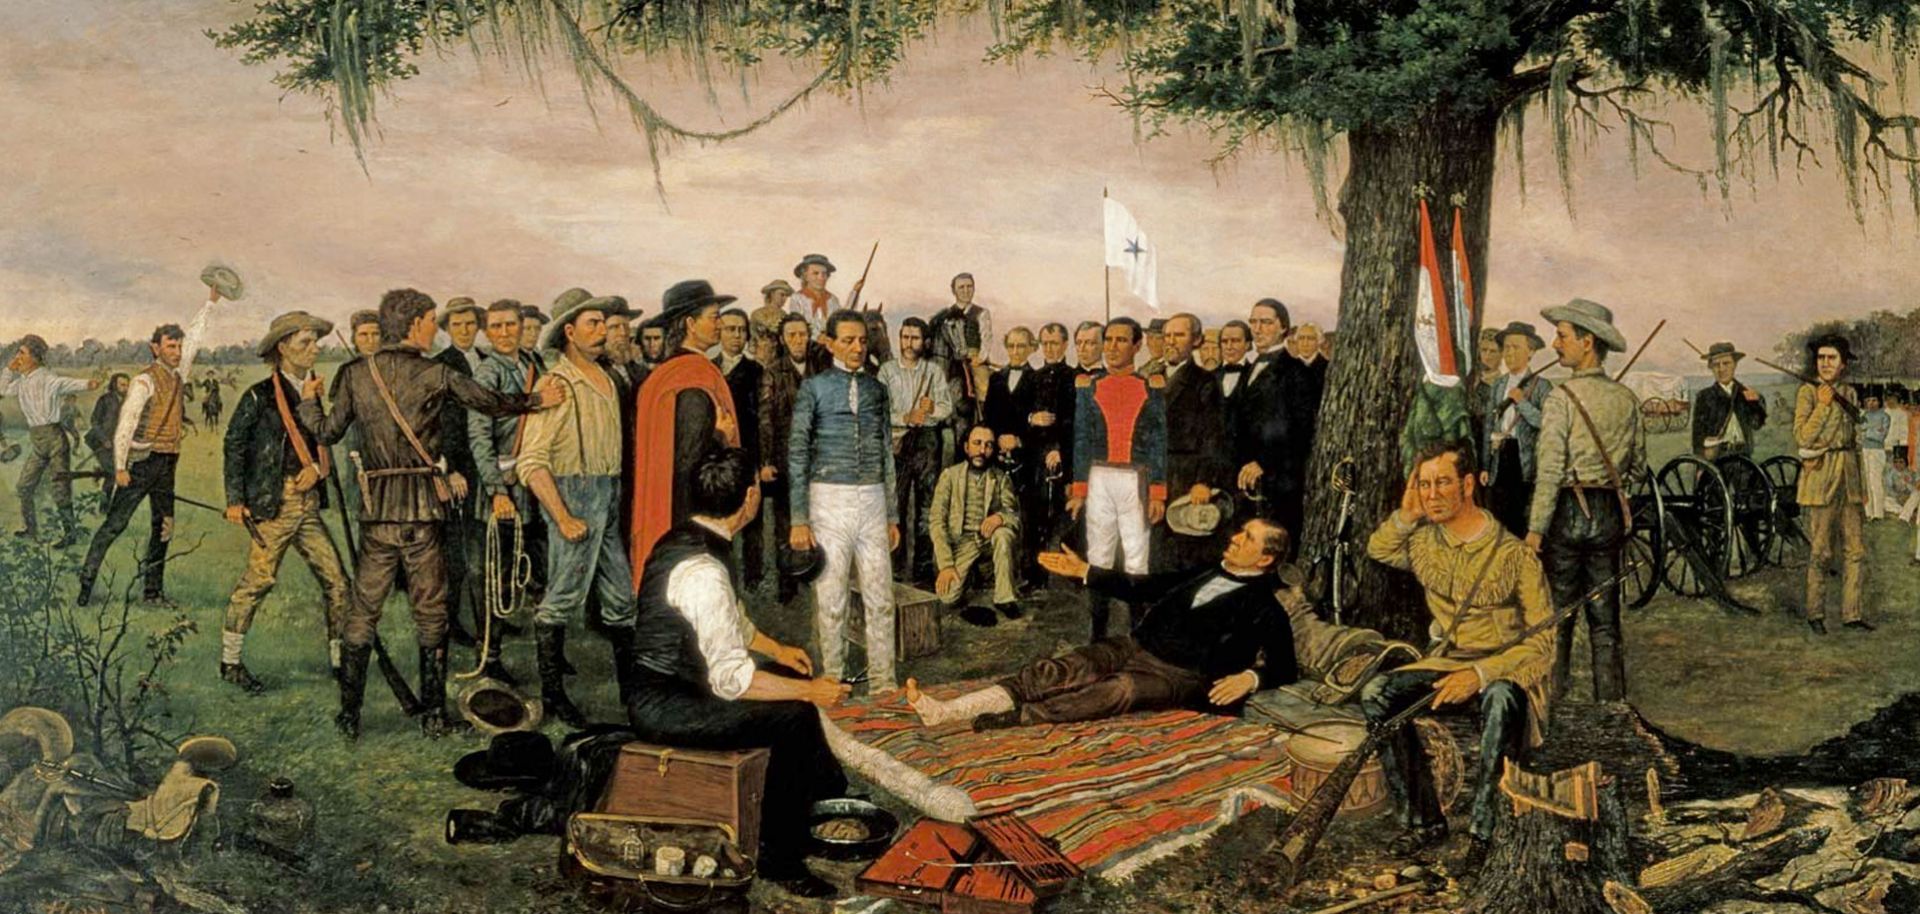 The surrender of Mexican Gen. Antonio Lopez de Santa Anna after the Battle of San Jacinto capped an unlikely victory for the Texians under Gen. Sam Houston that set the modern relationship between Mexico and the United States.